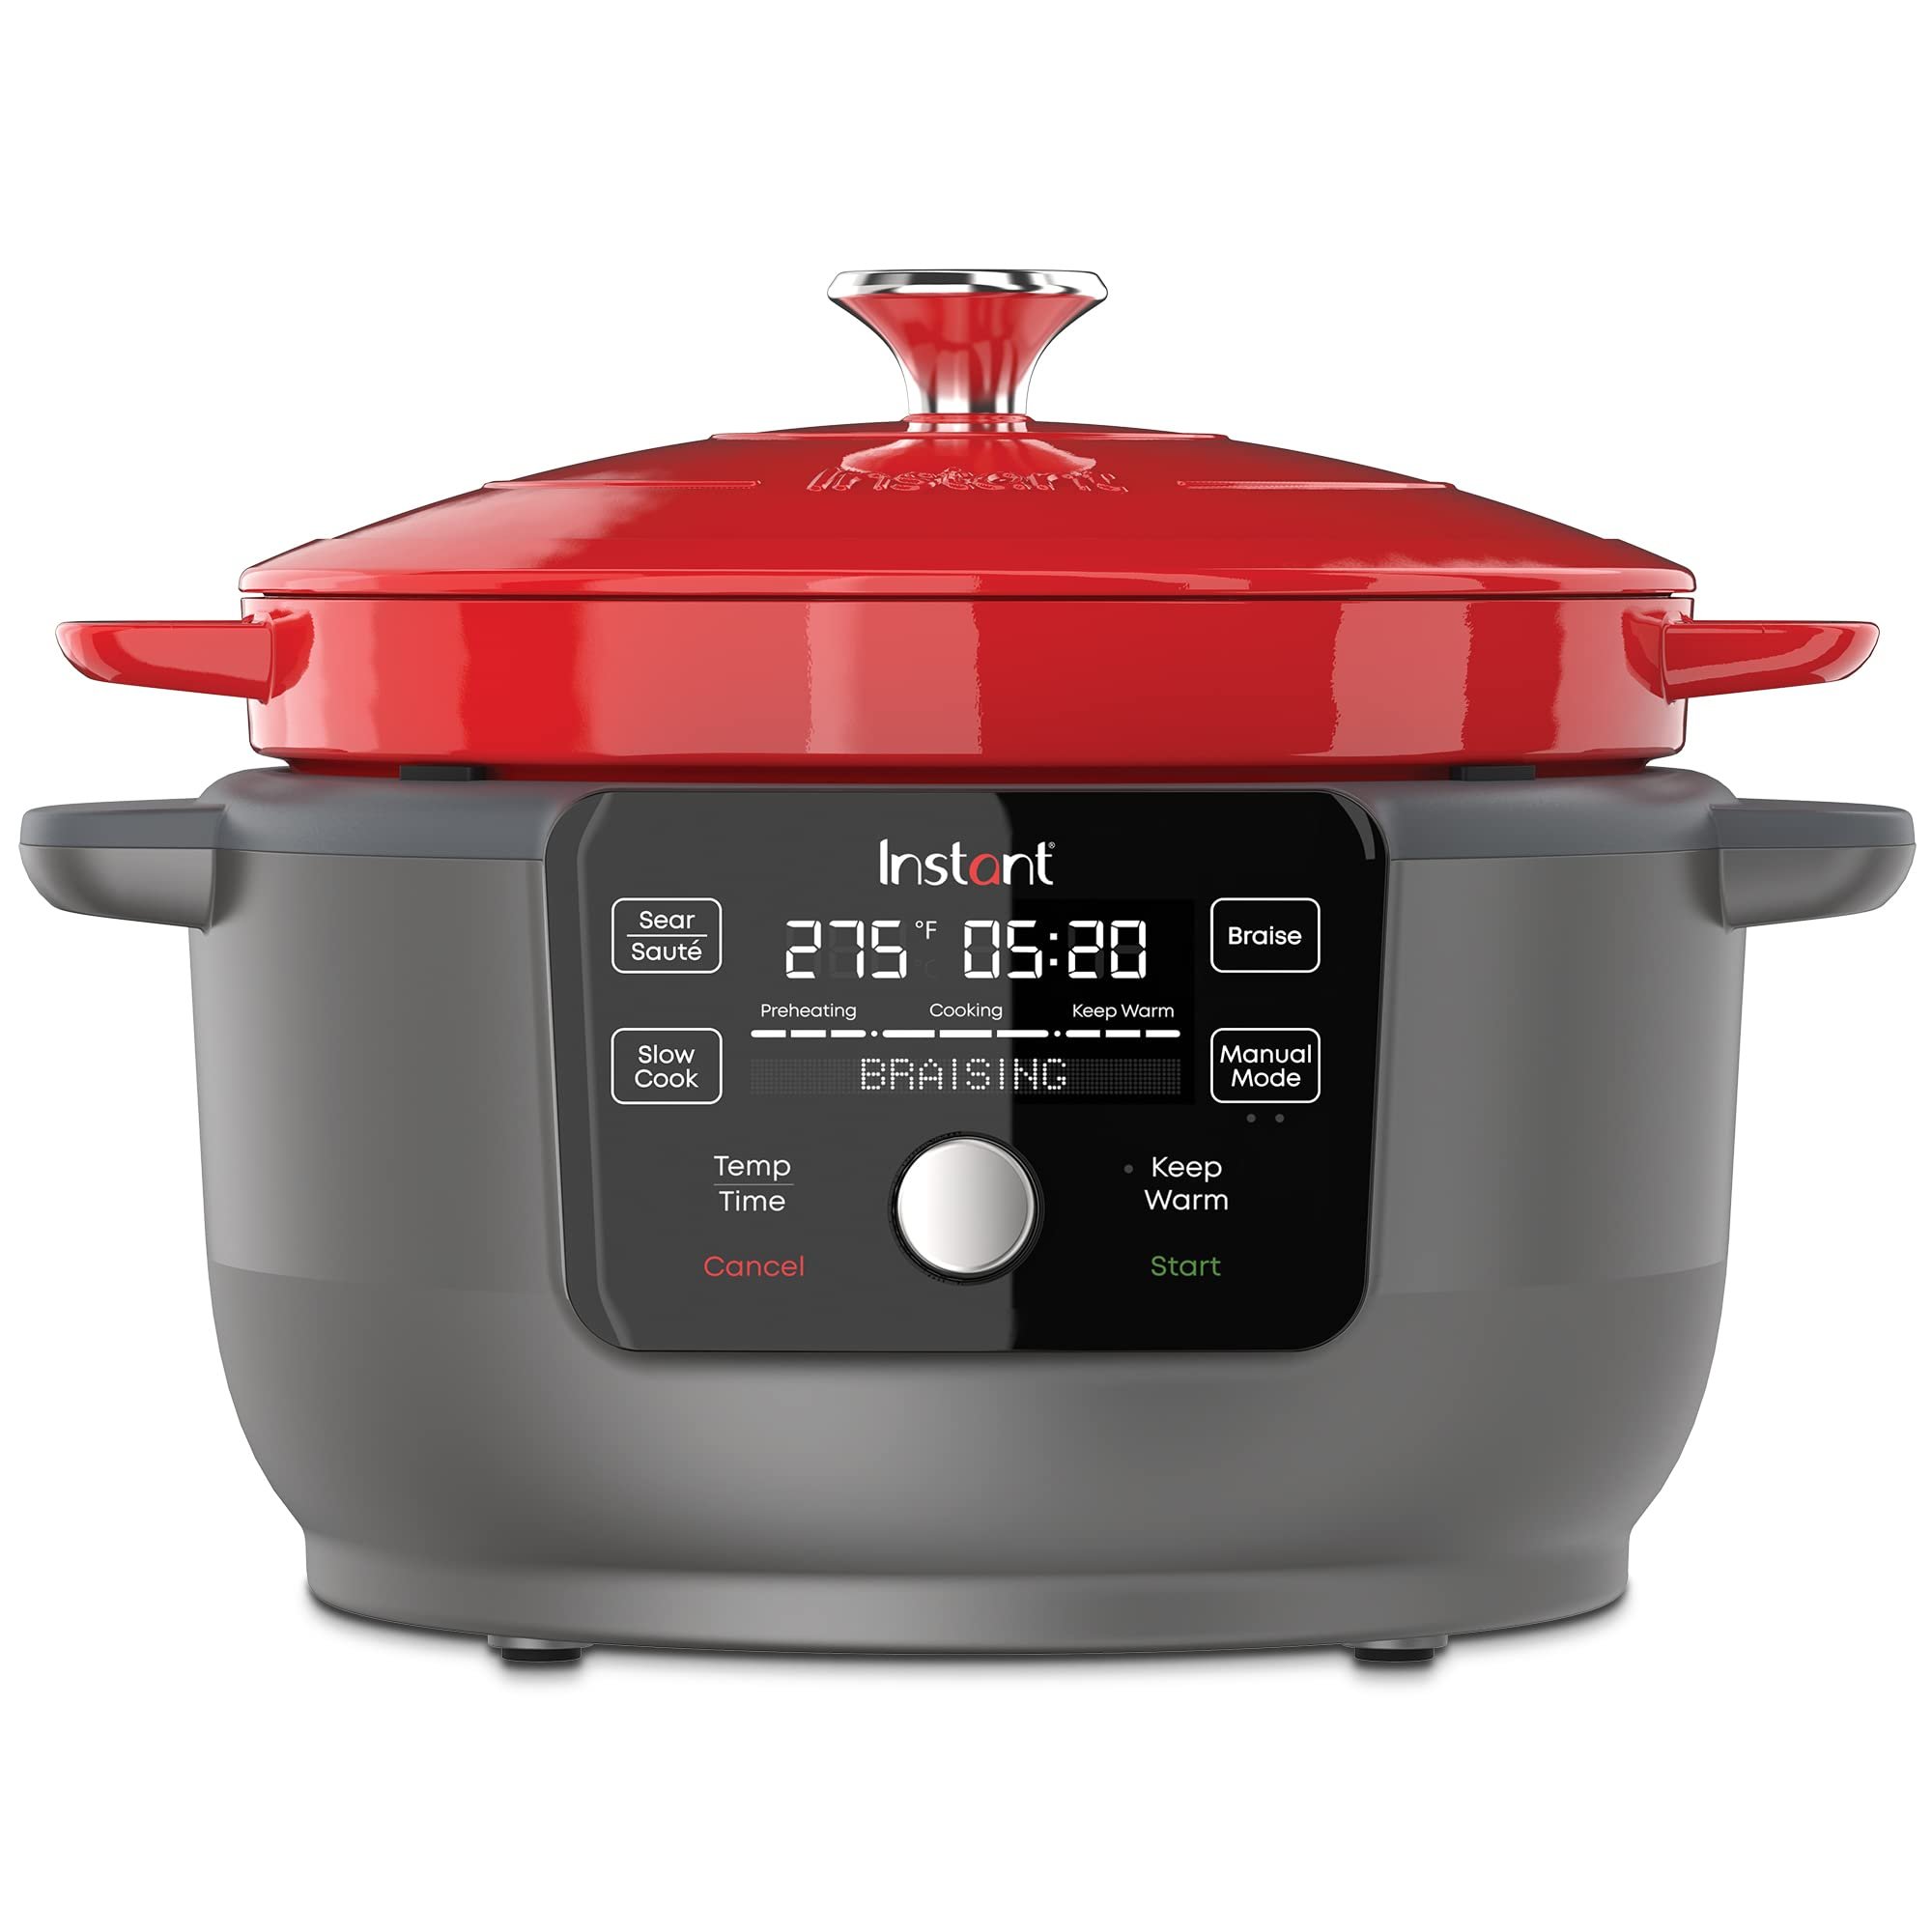 Save $80 on an Instant dutch oven for more convenient meals